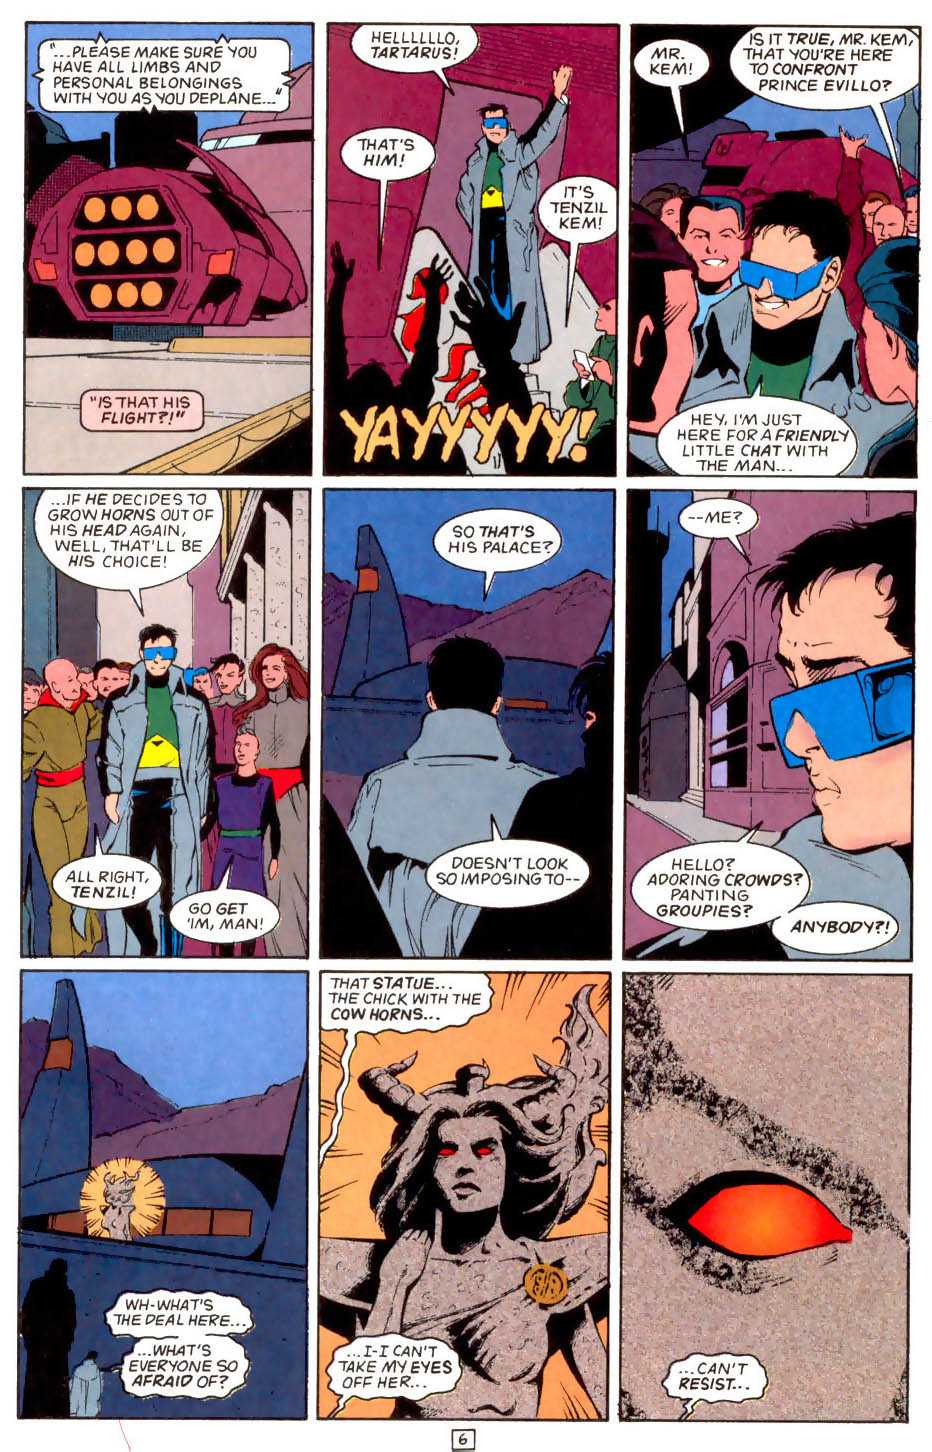 Legion of Super-Heroes (1989) 49 Page 6